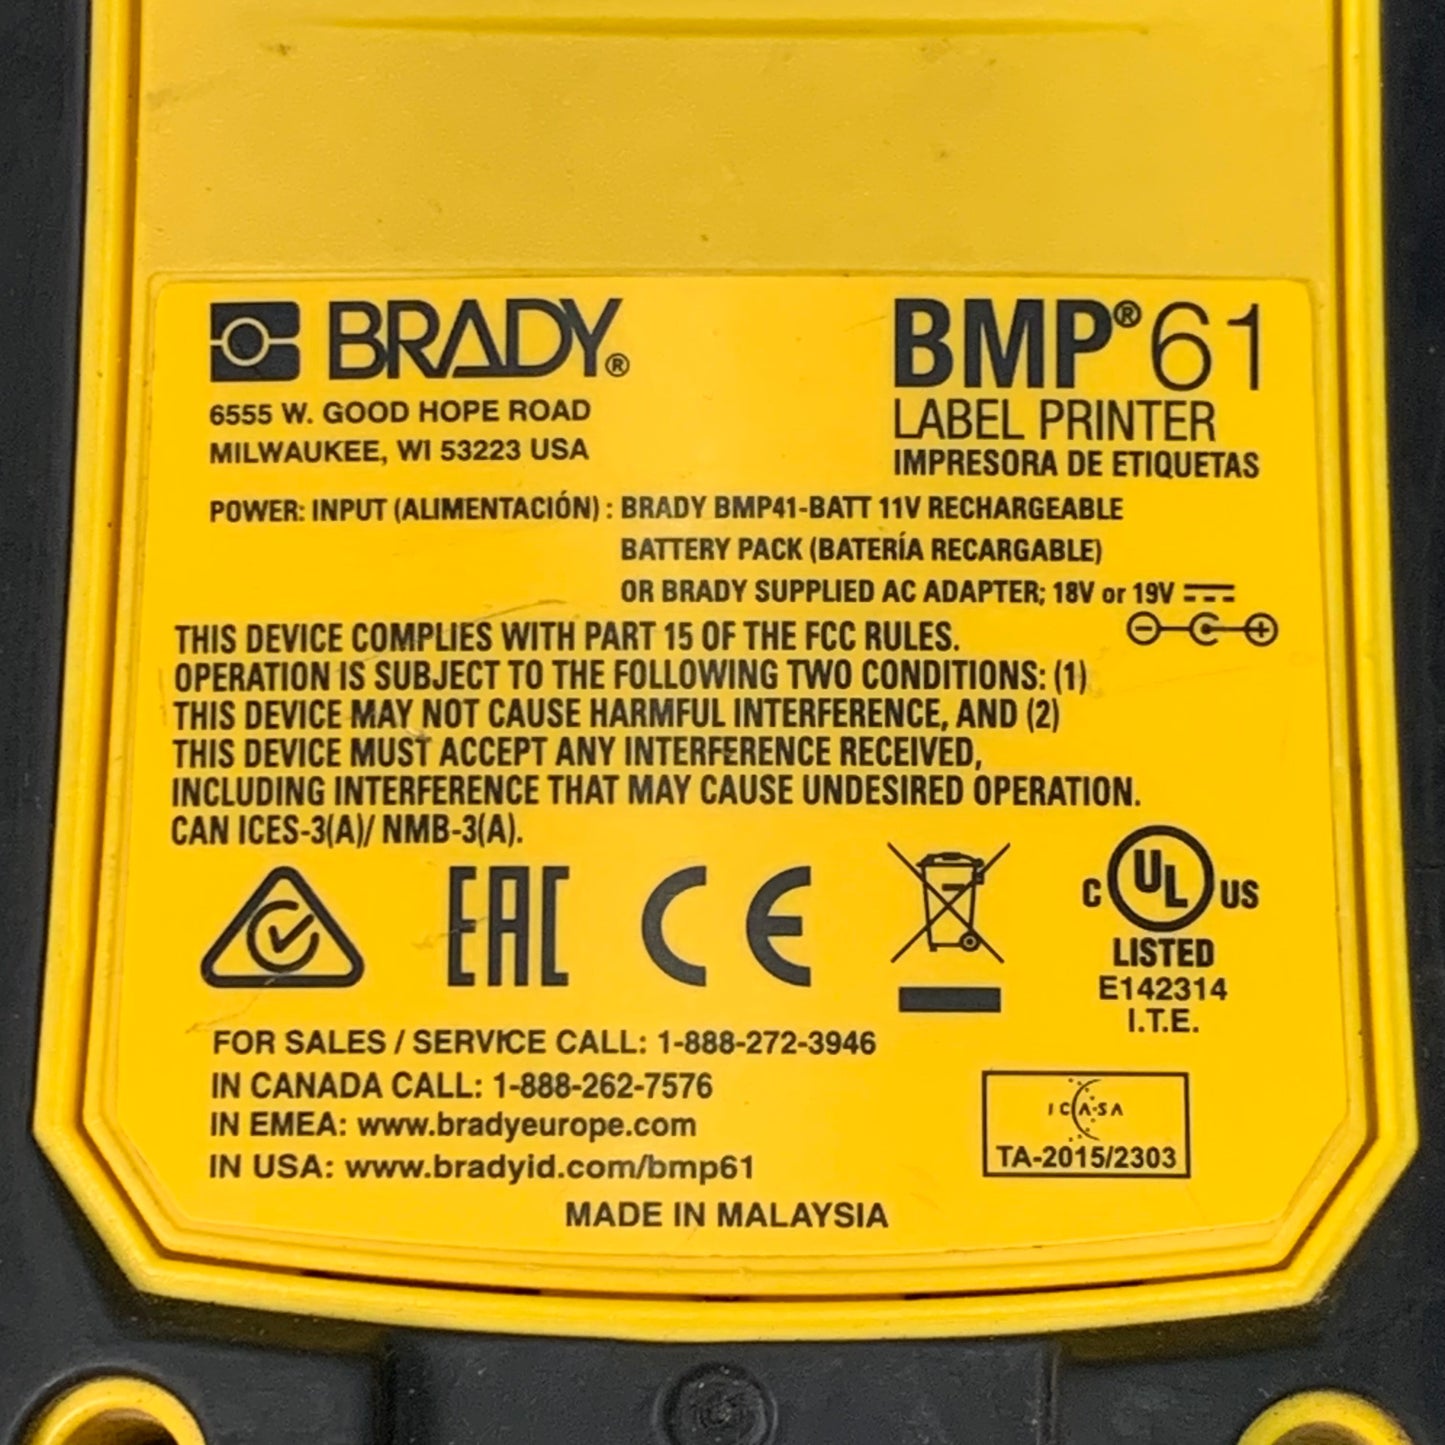 BRADY Portable Handheld Label Printer BMP61 W/ Box of Heat Shrink Labels (Pre-Owned)